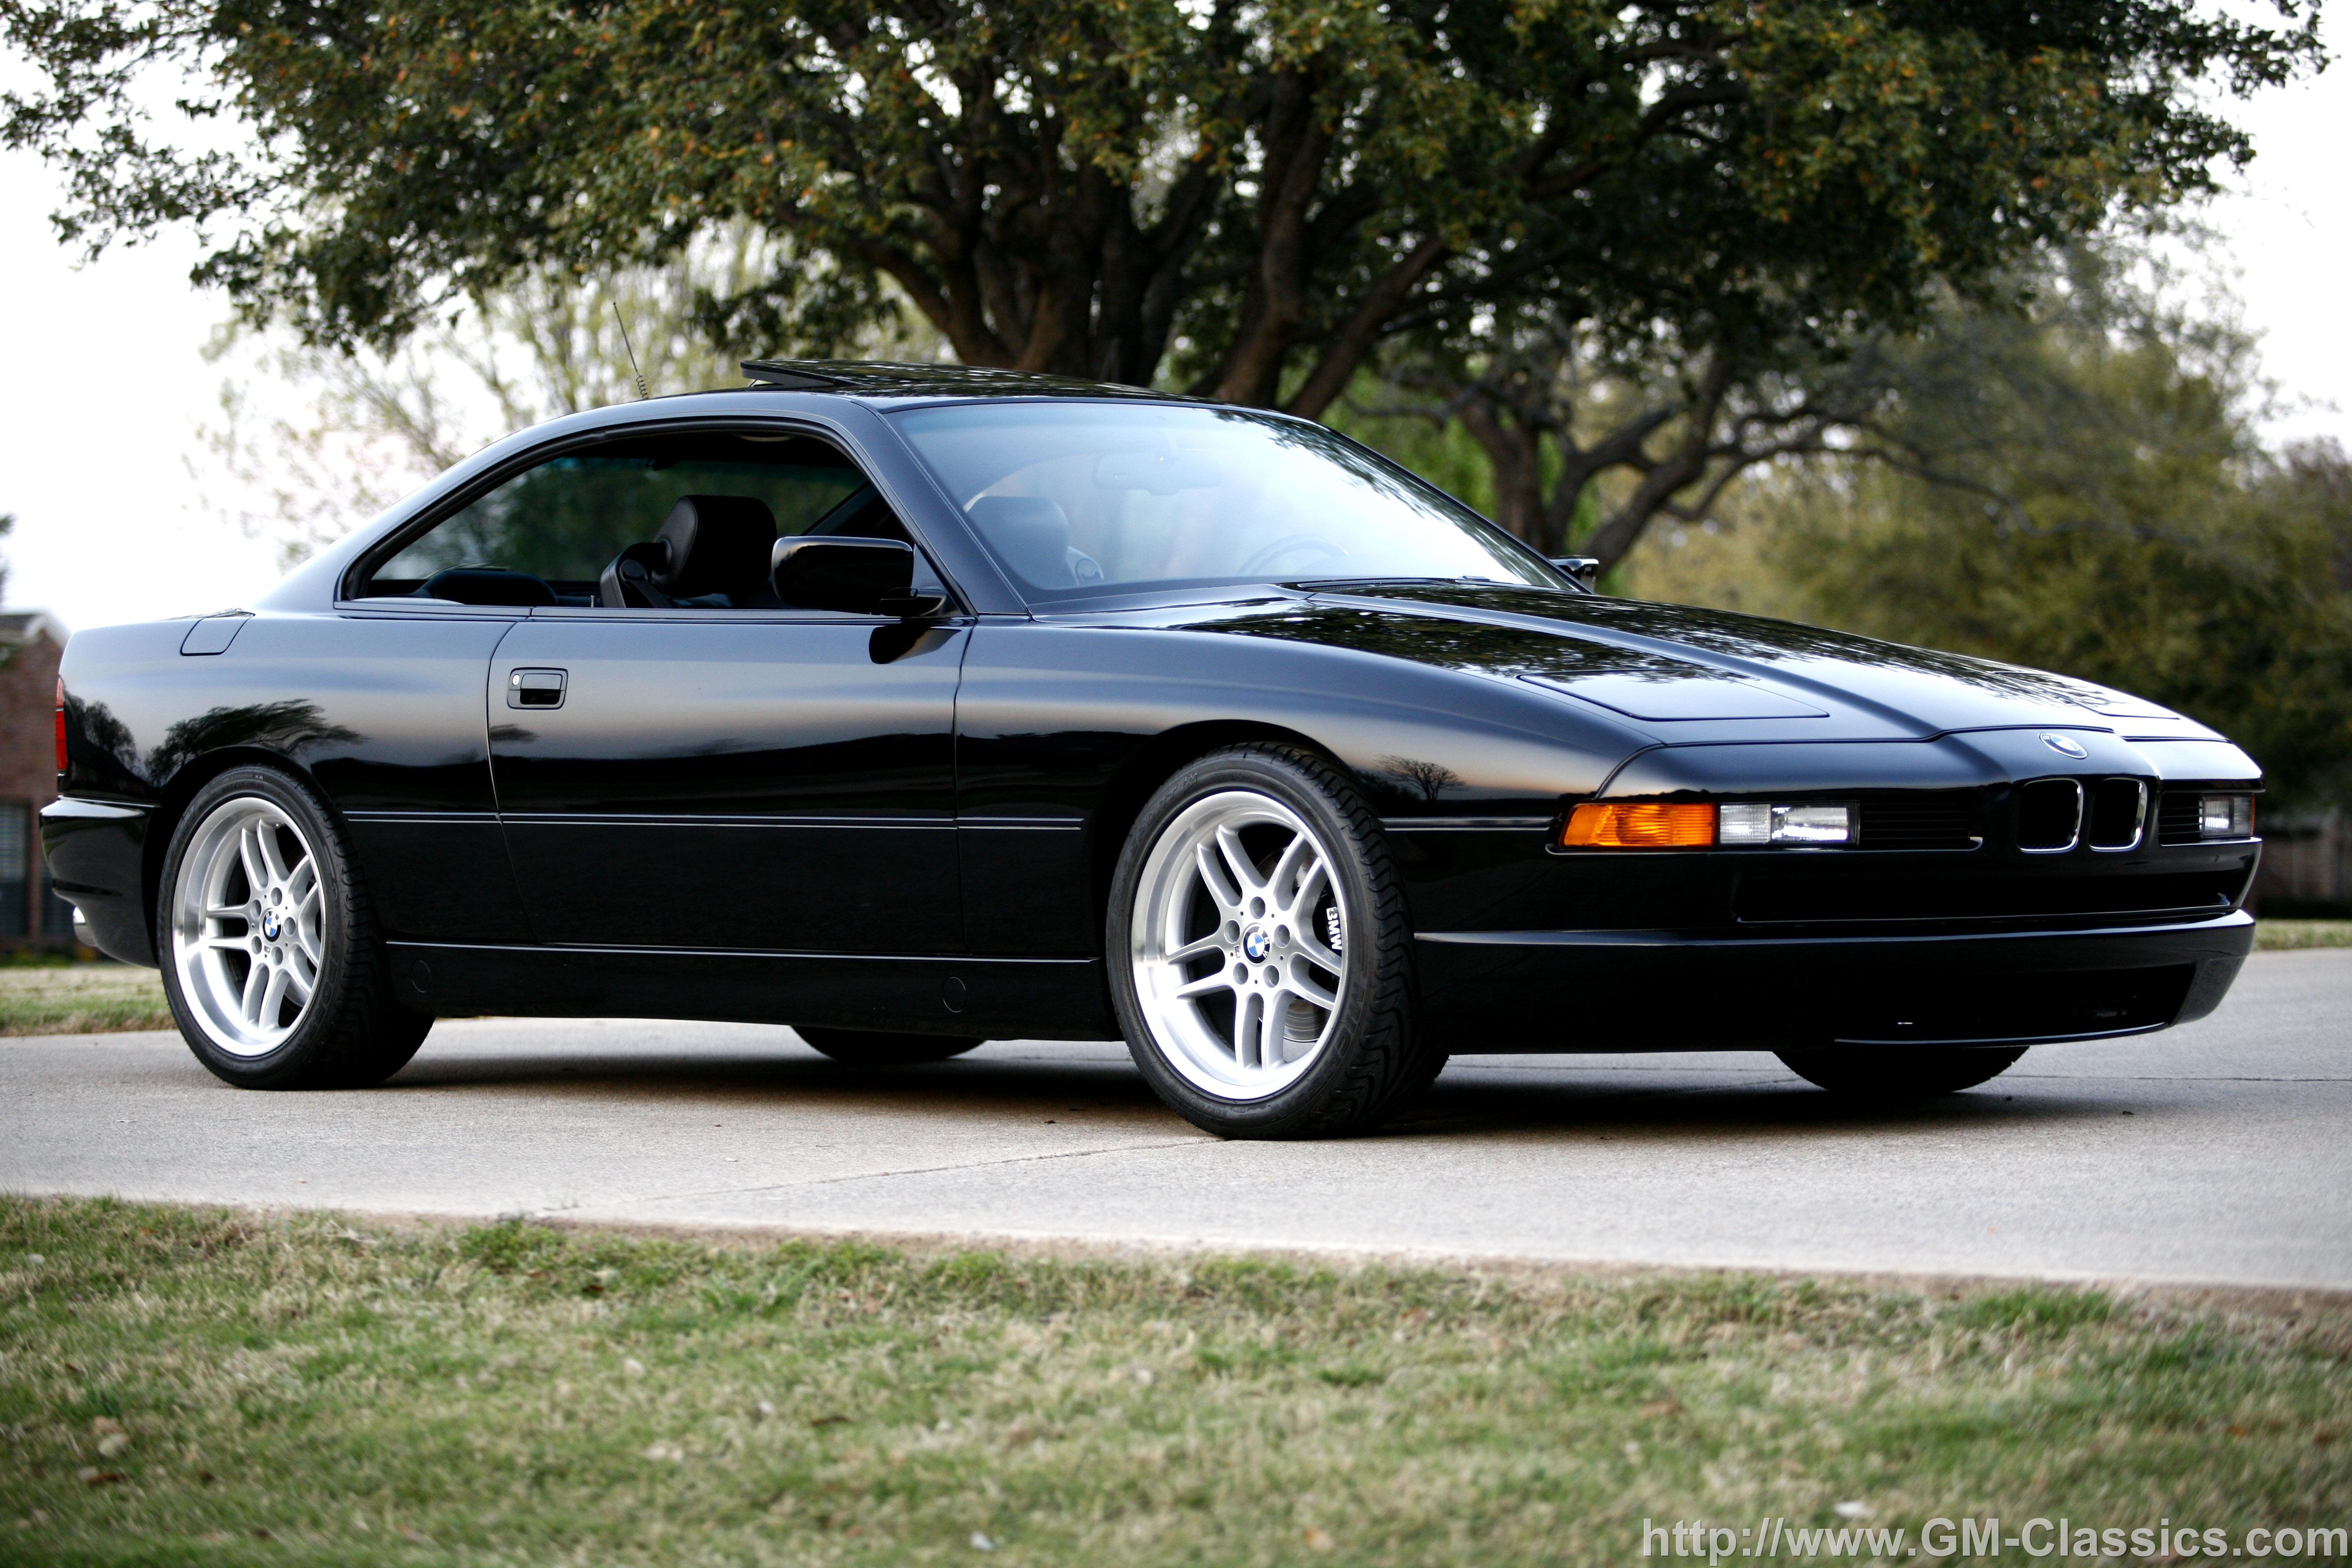 BMW 850. View Download Wallpaper. 4368x2912. Comments